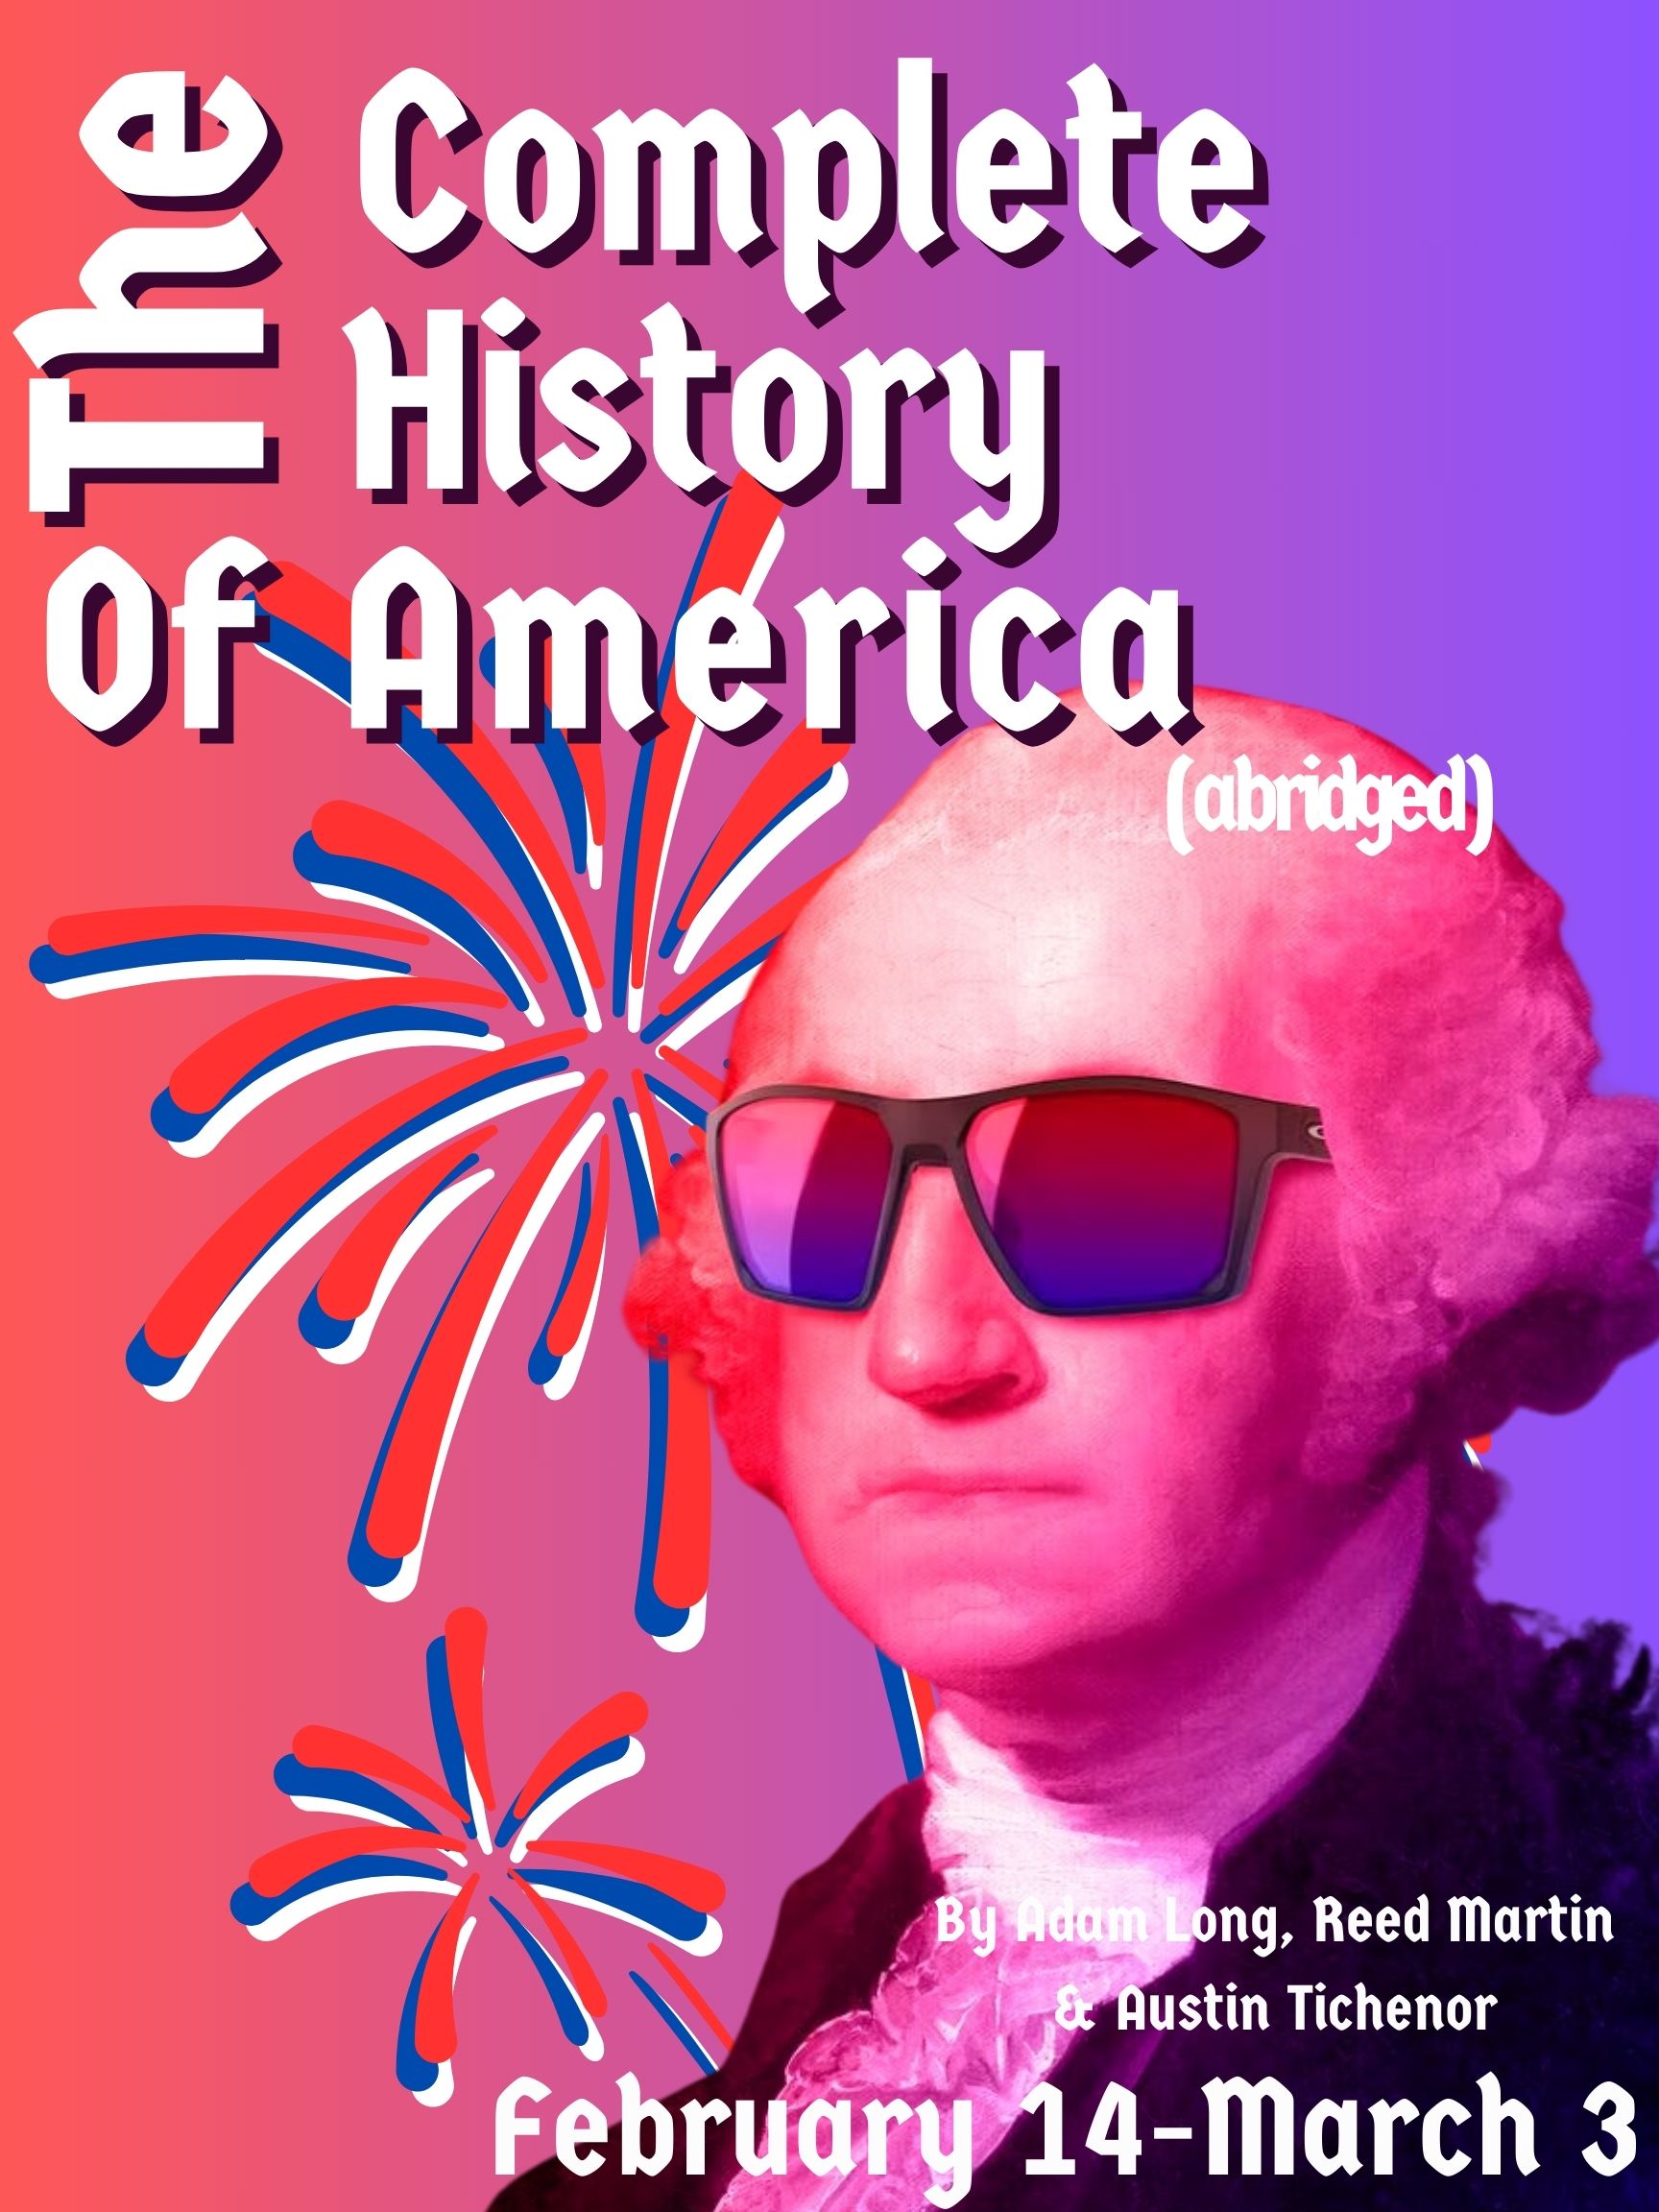 The Complete History of America (Abridged) by Hill Country Arts Foundation (HCAF)